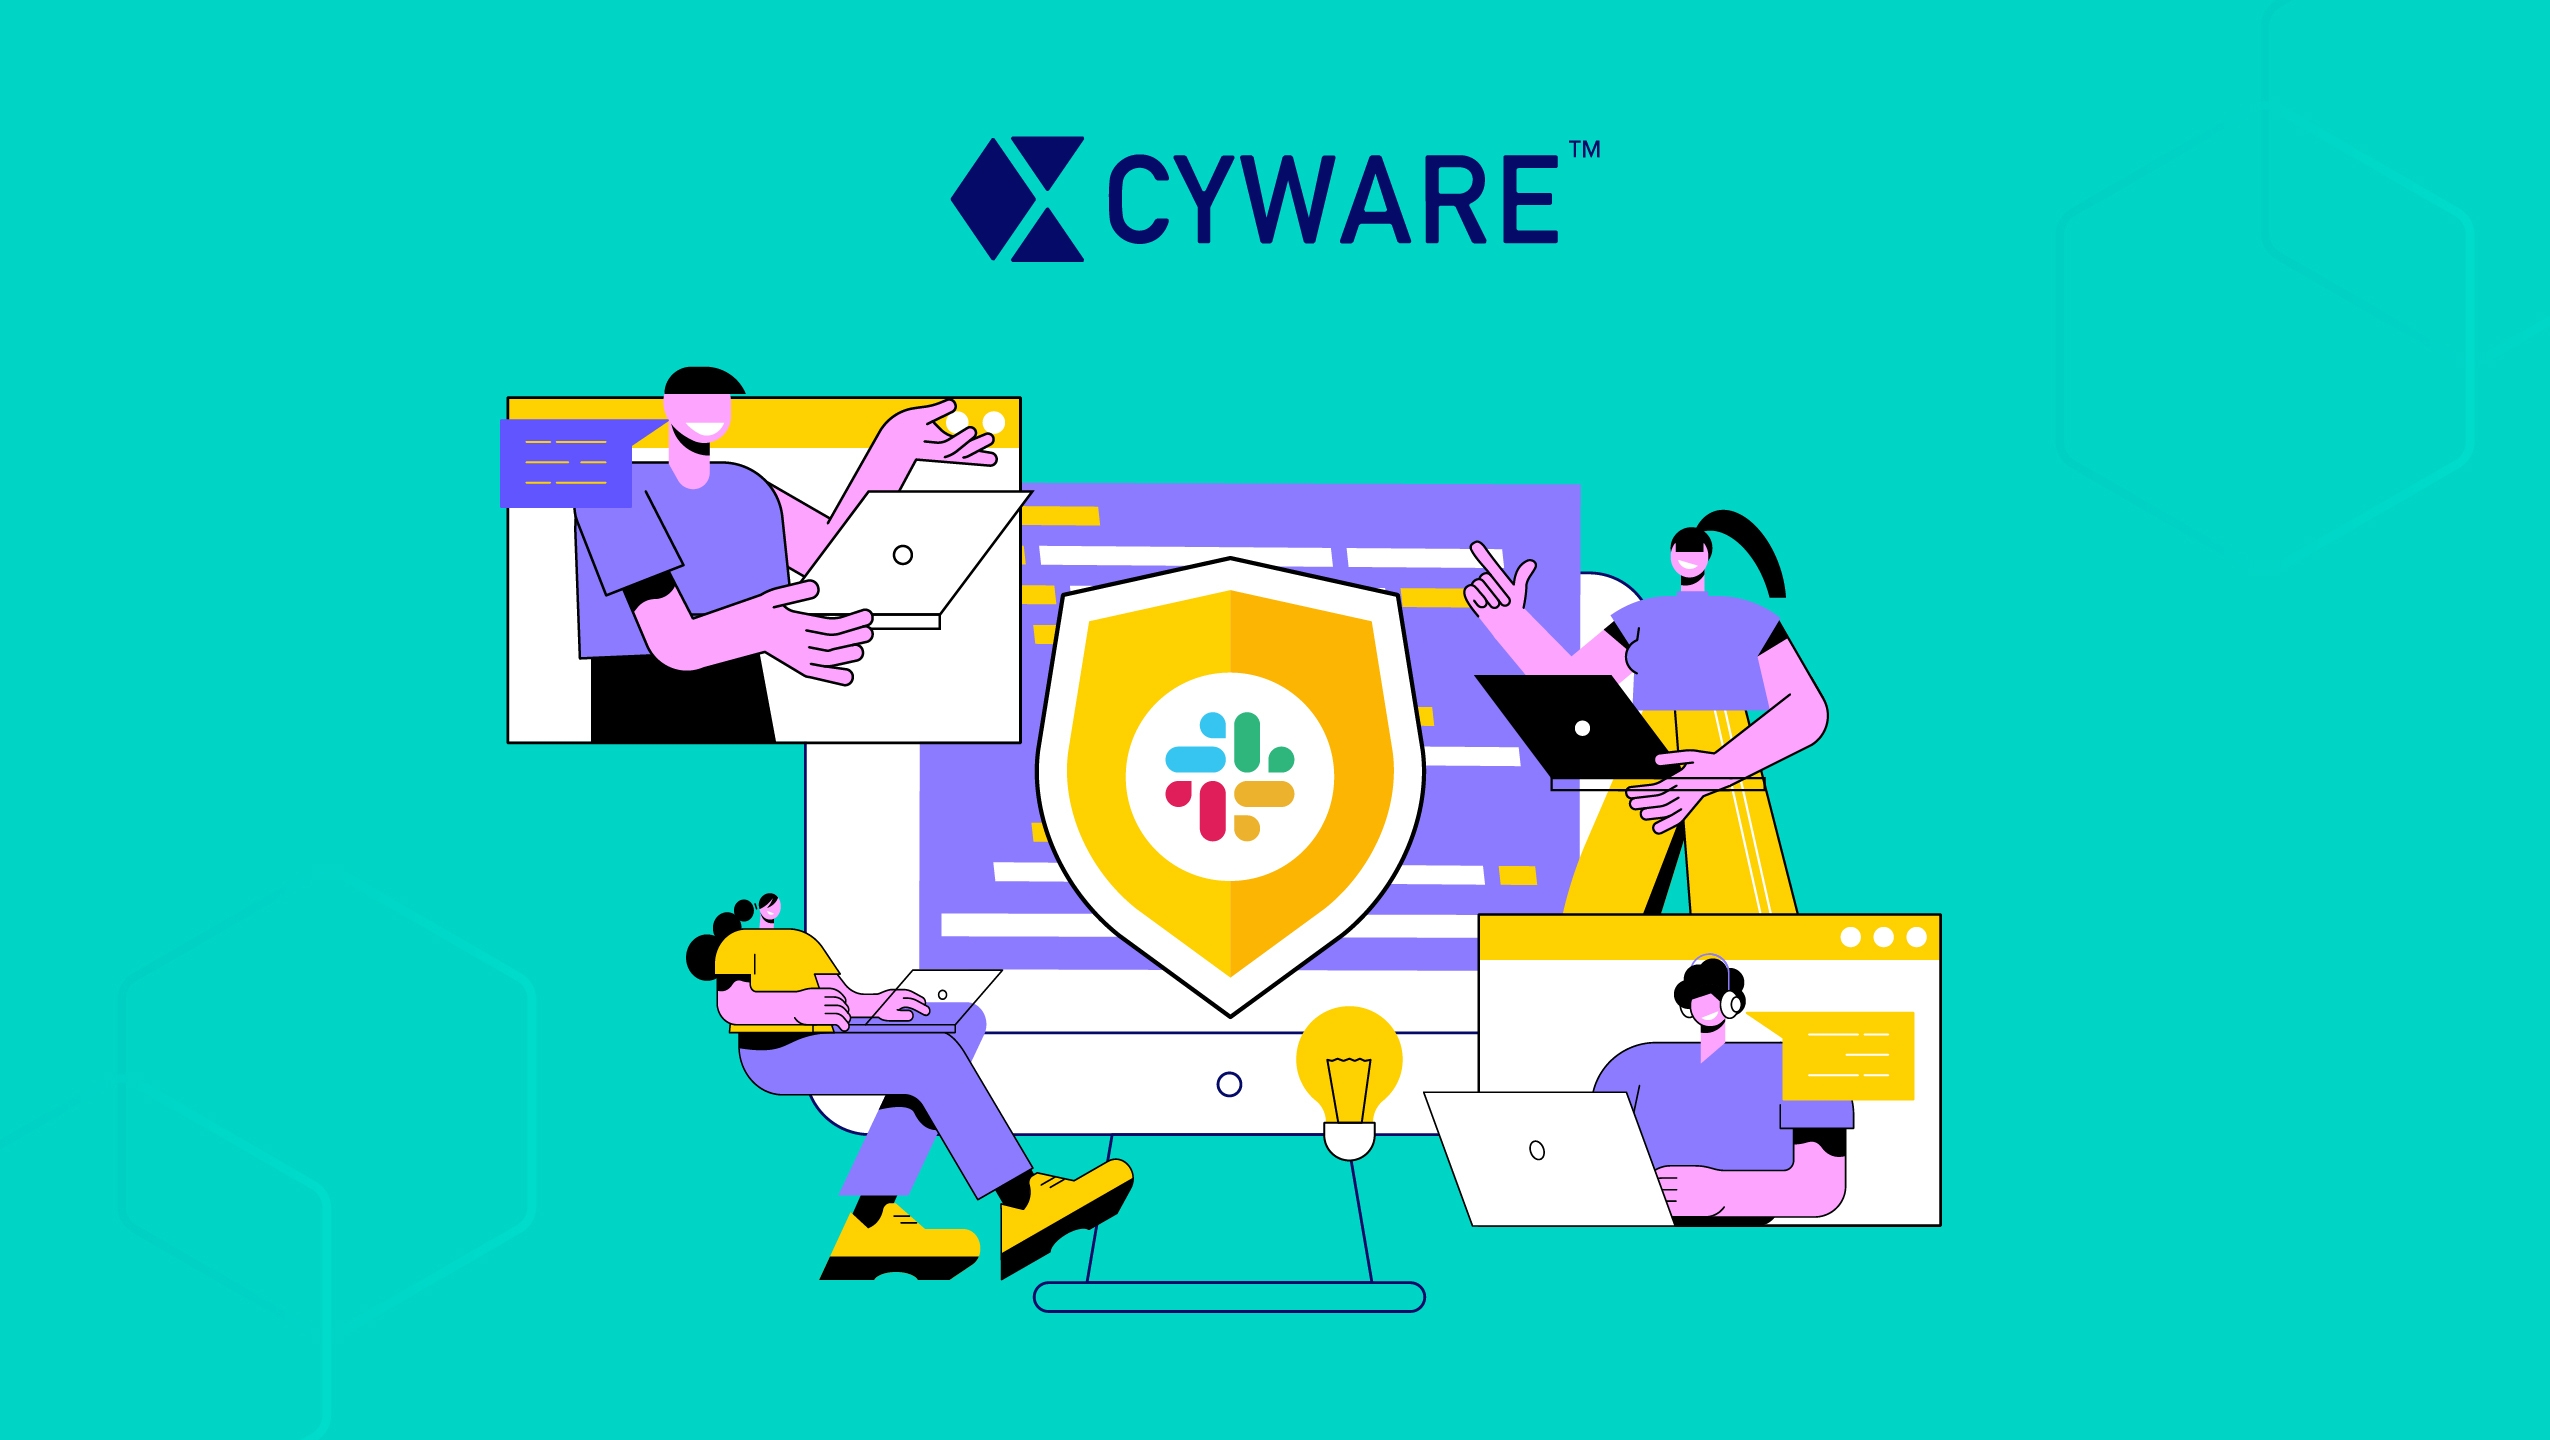 Information Sharing for Incident Response Teams is Now Easy with Cyware’s Slack Integration